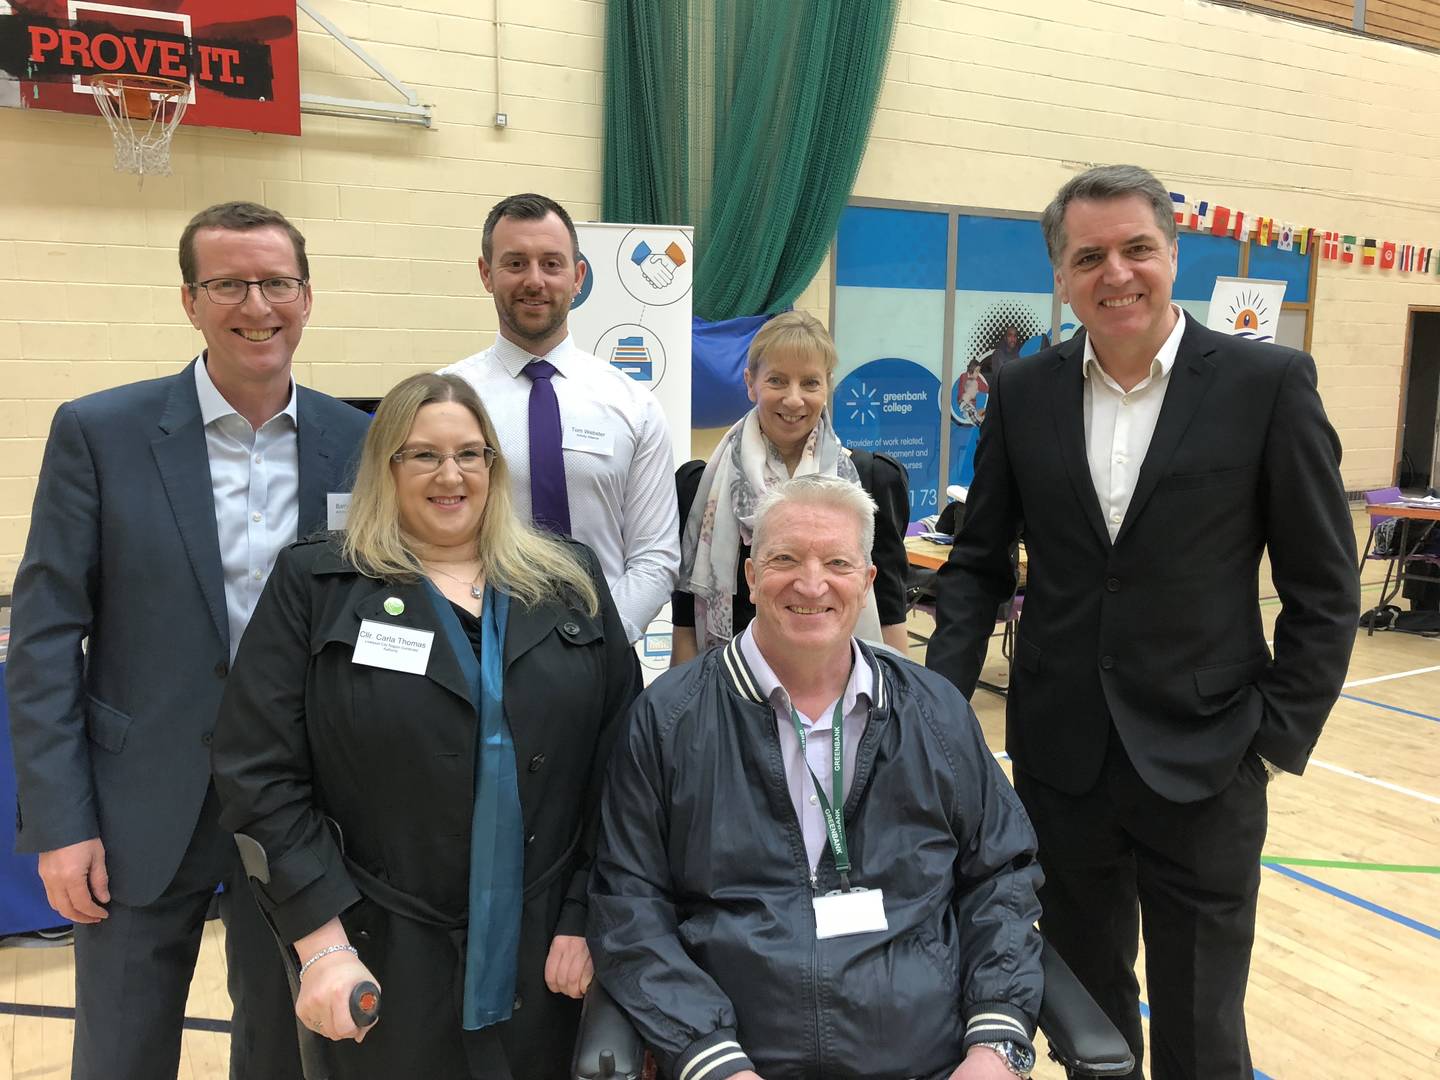 Liverpool City Region engagement event - Barry Horne, Tom Webster, Mary Beaumont, Steve Rotheram, Carla Thomas and Greenbank Trustee William Shorthall. 